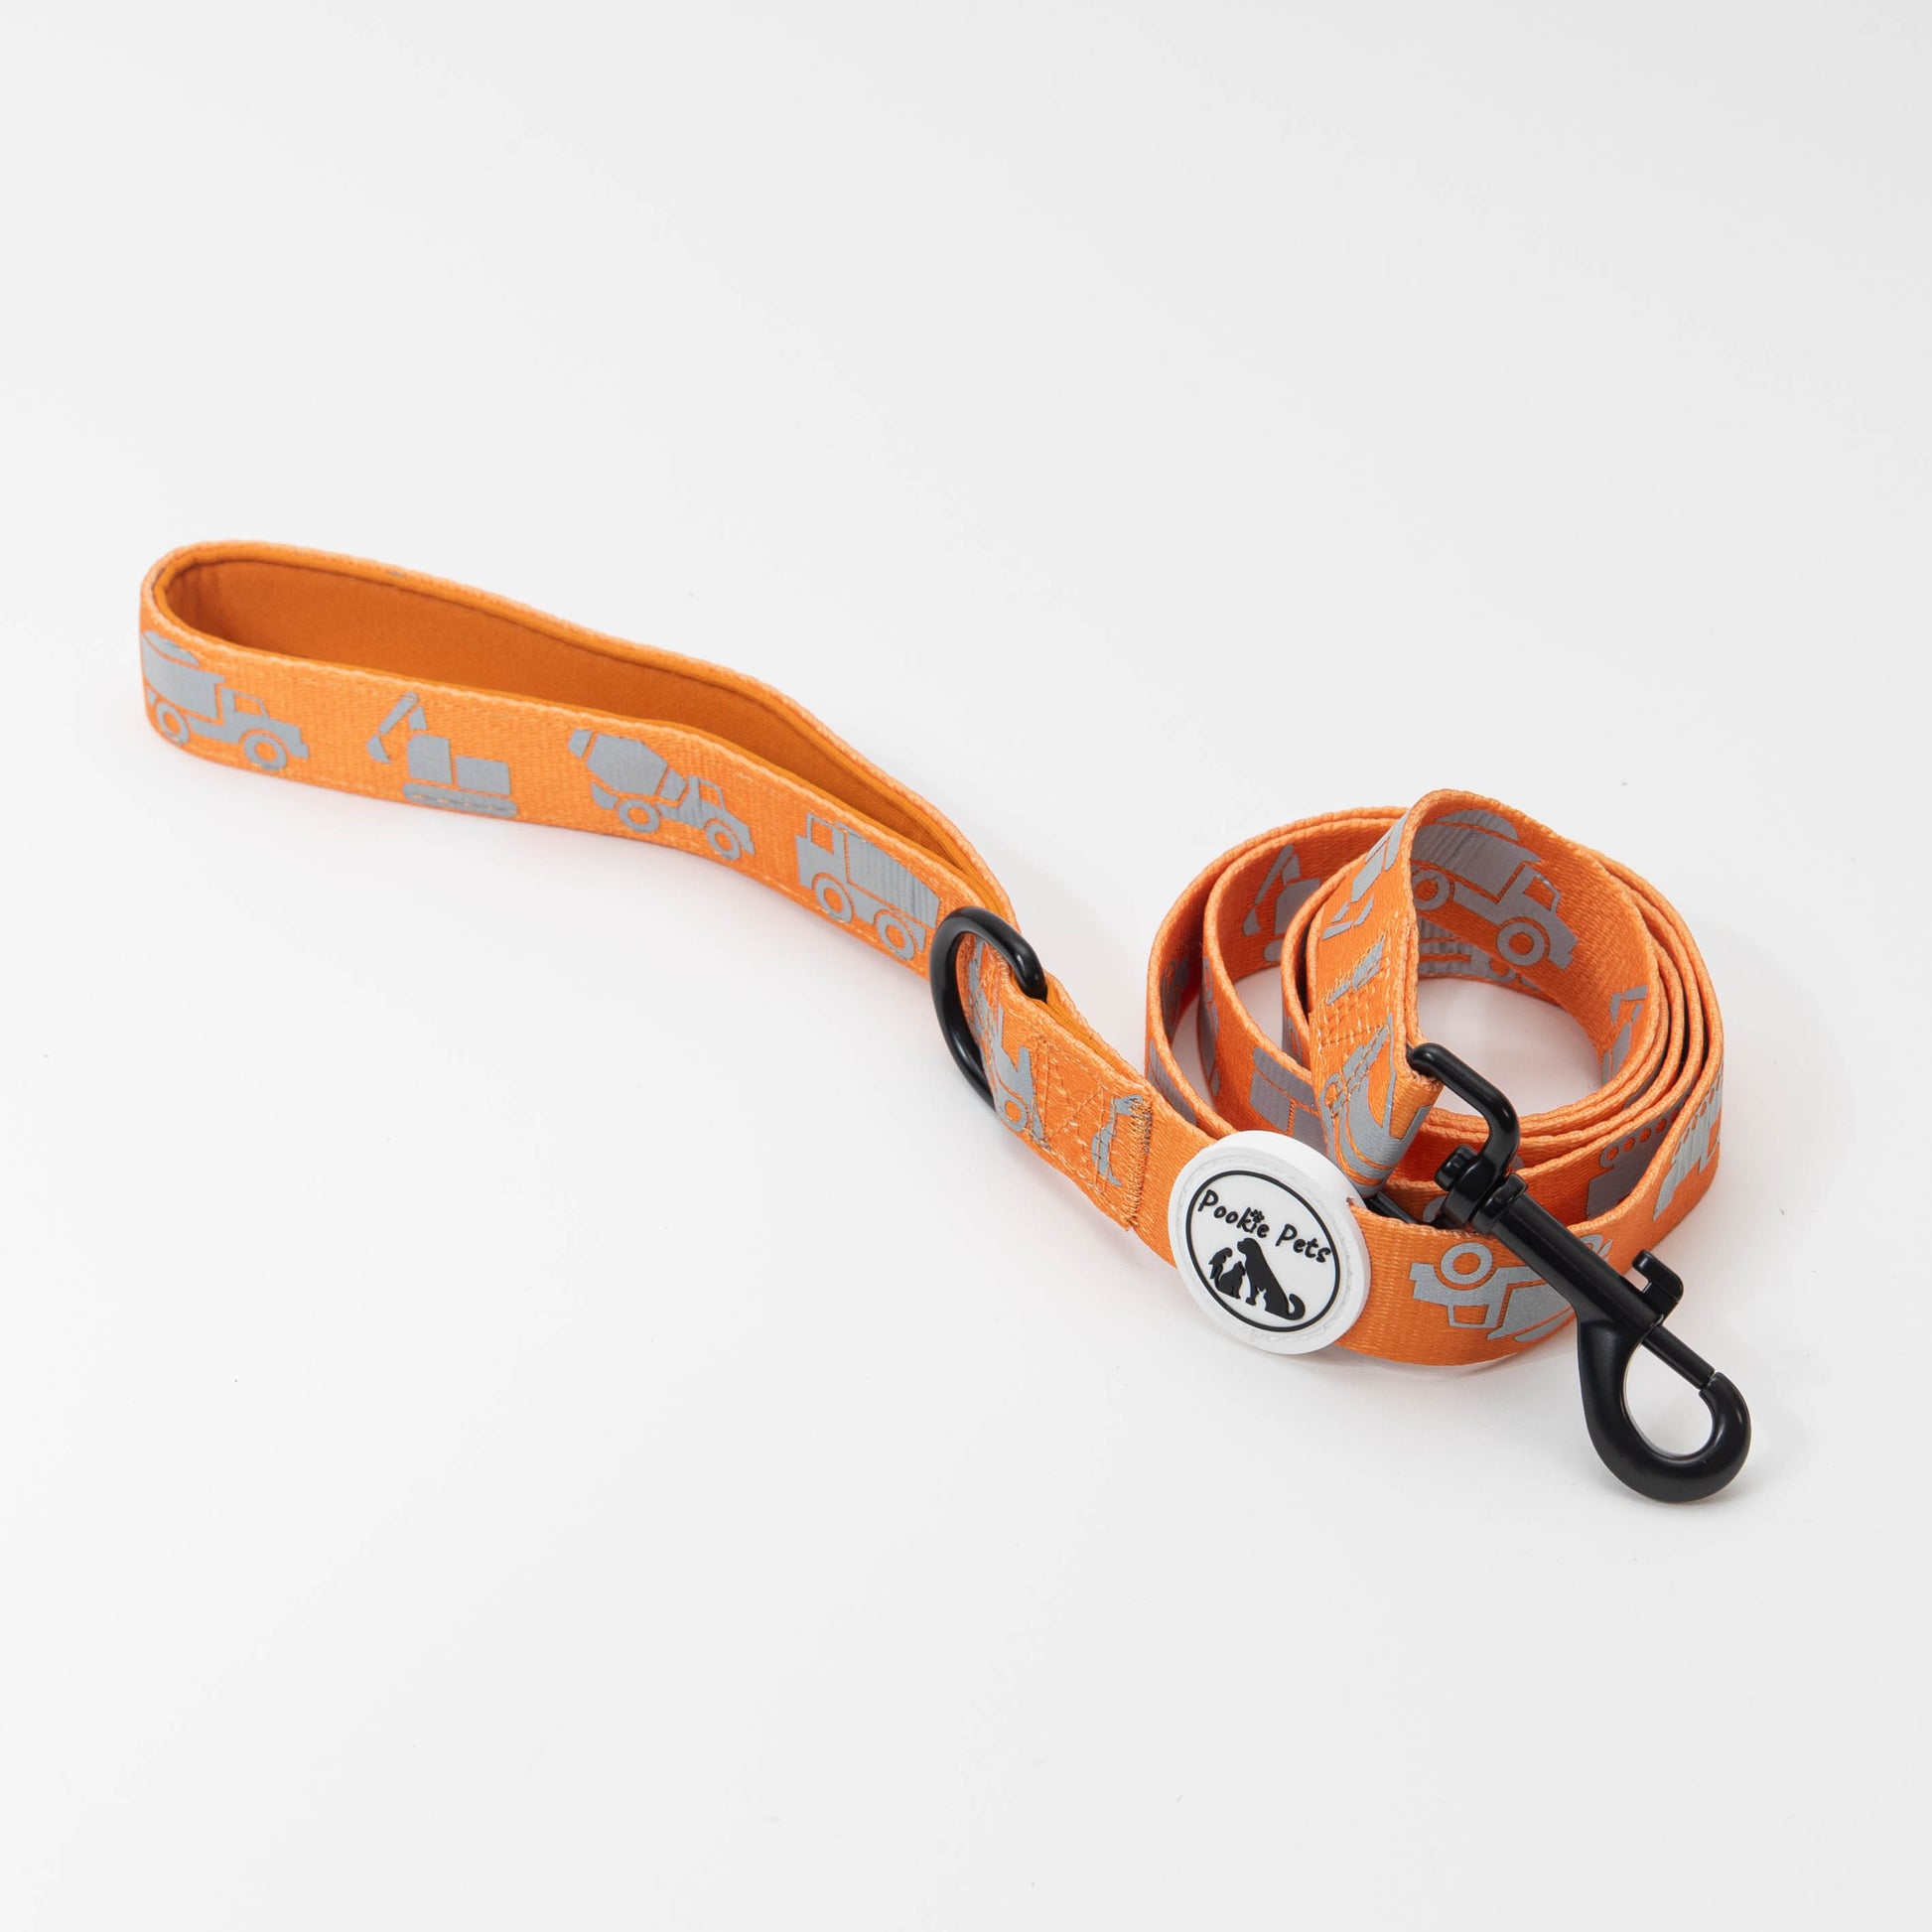 Reflective Leash with Truck Designs - Pookie Pets